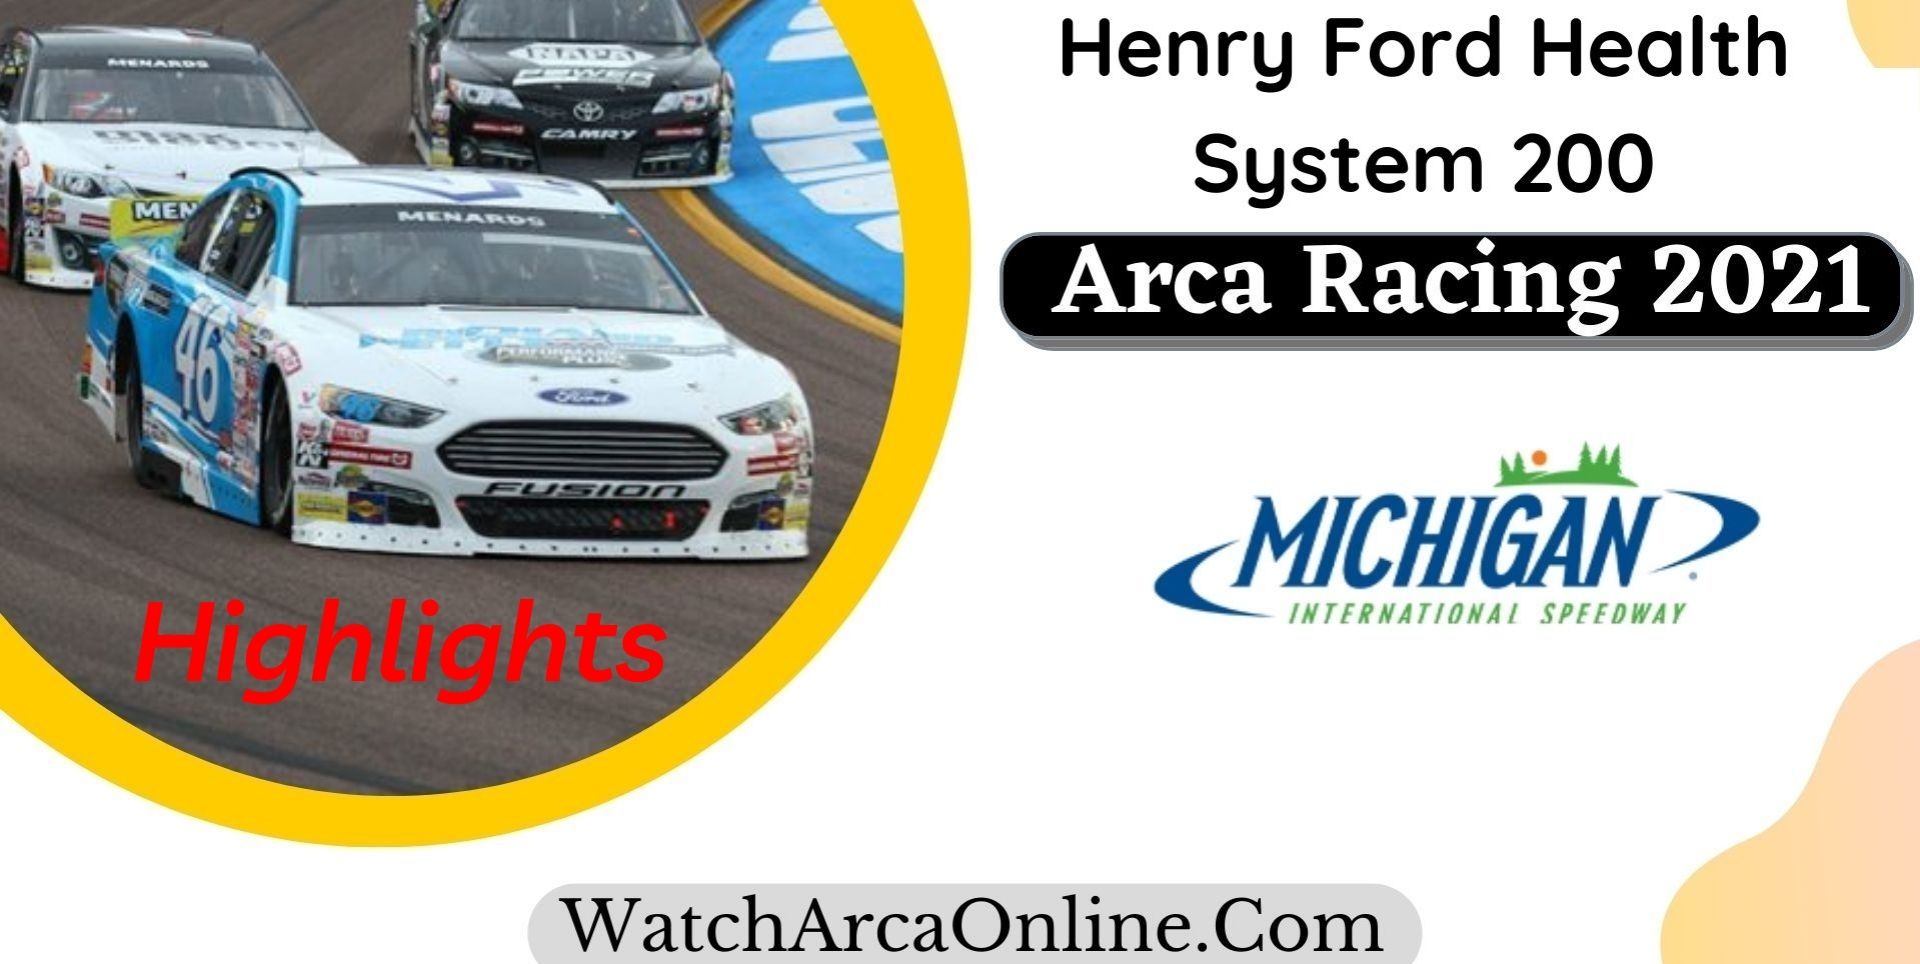 Henry Ford Health System 200 ARCA Racing Highlights 2021